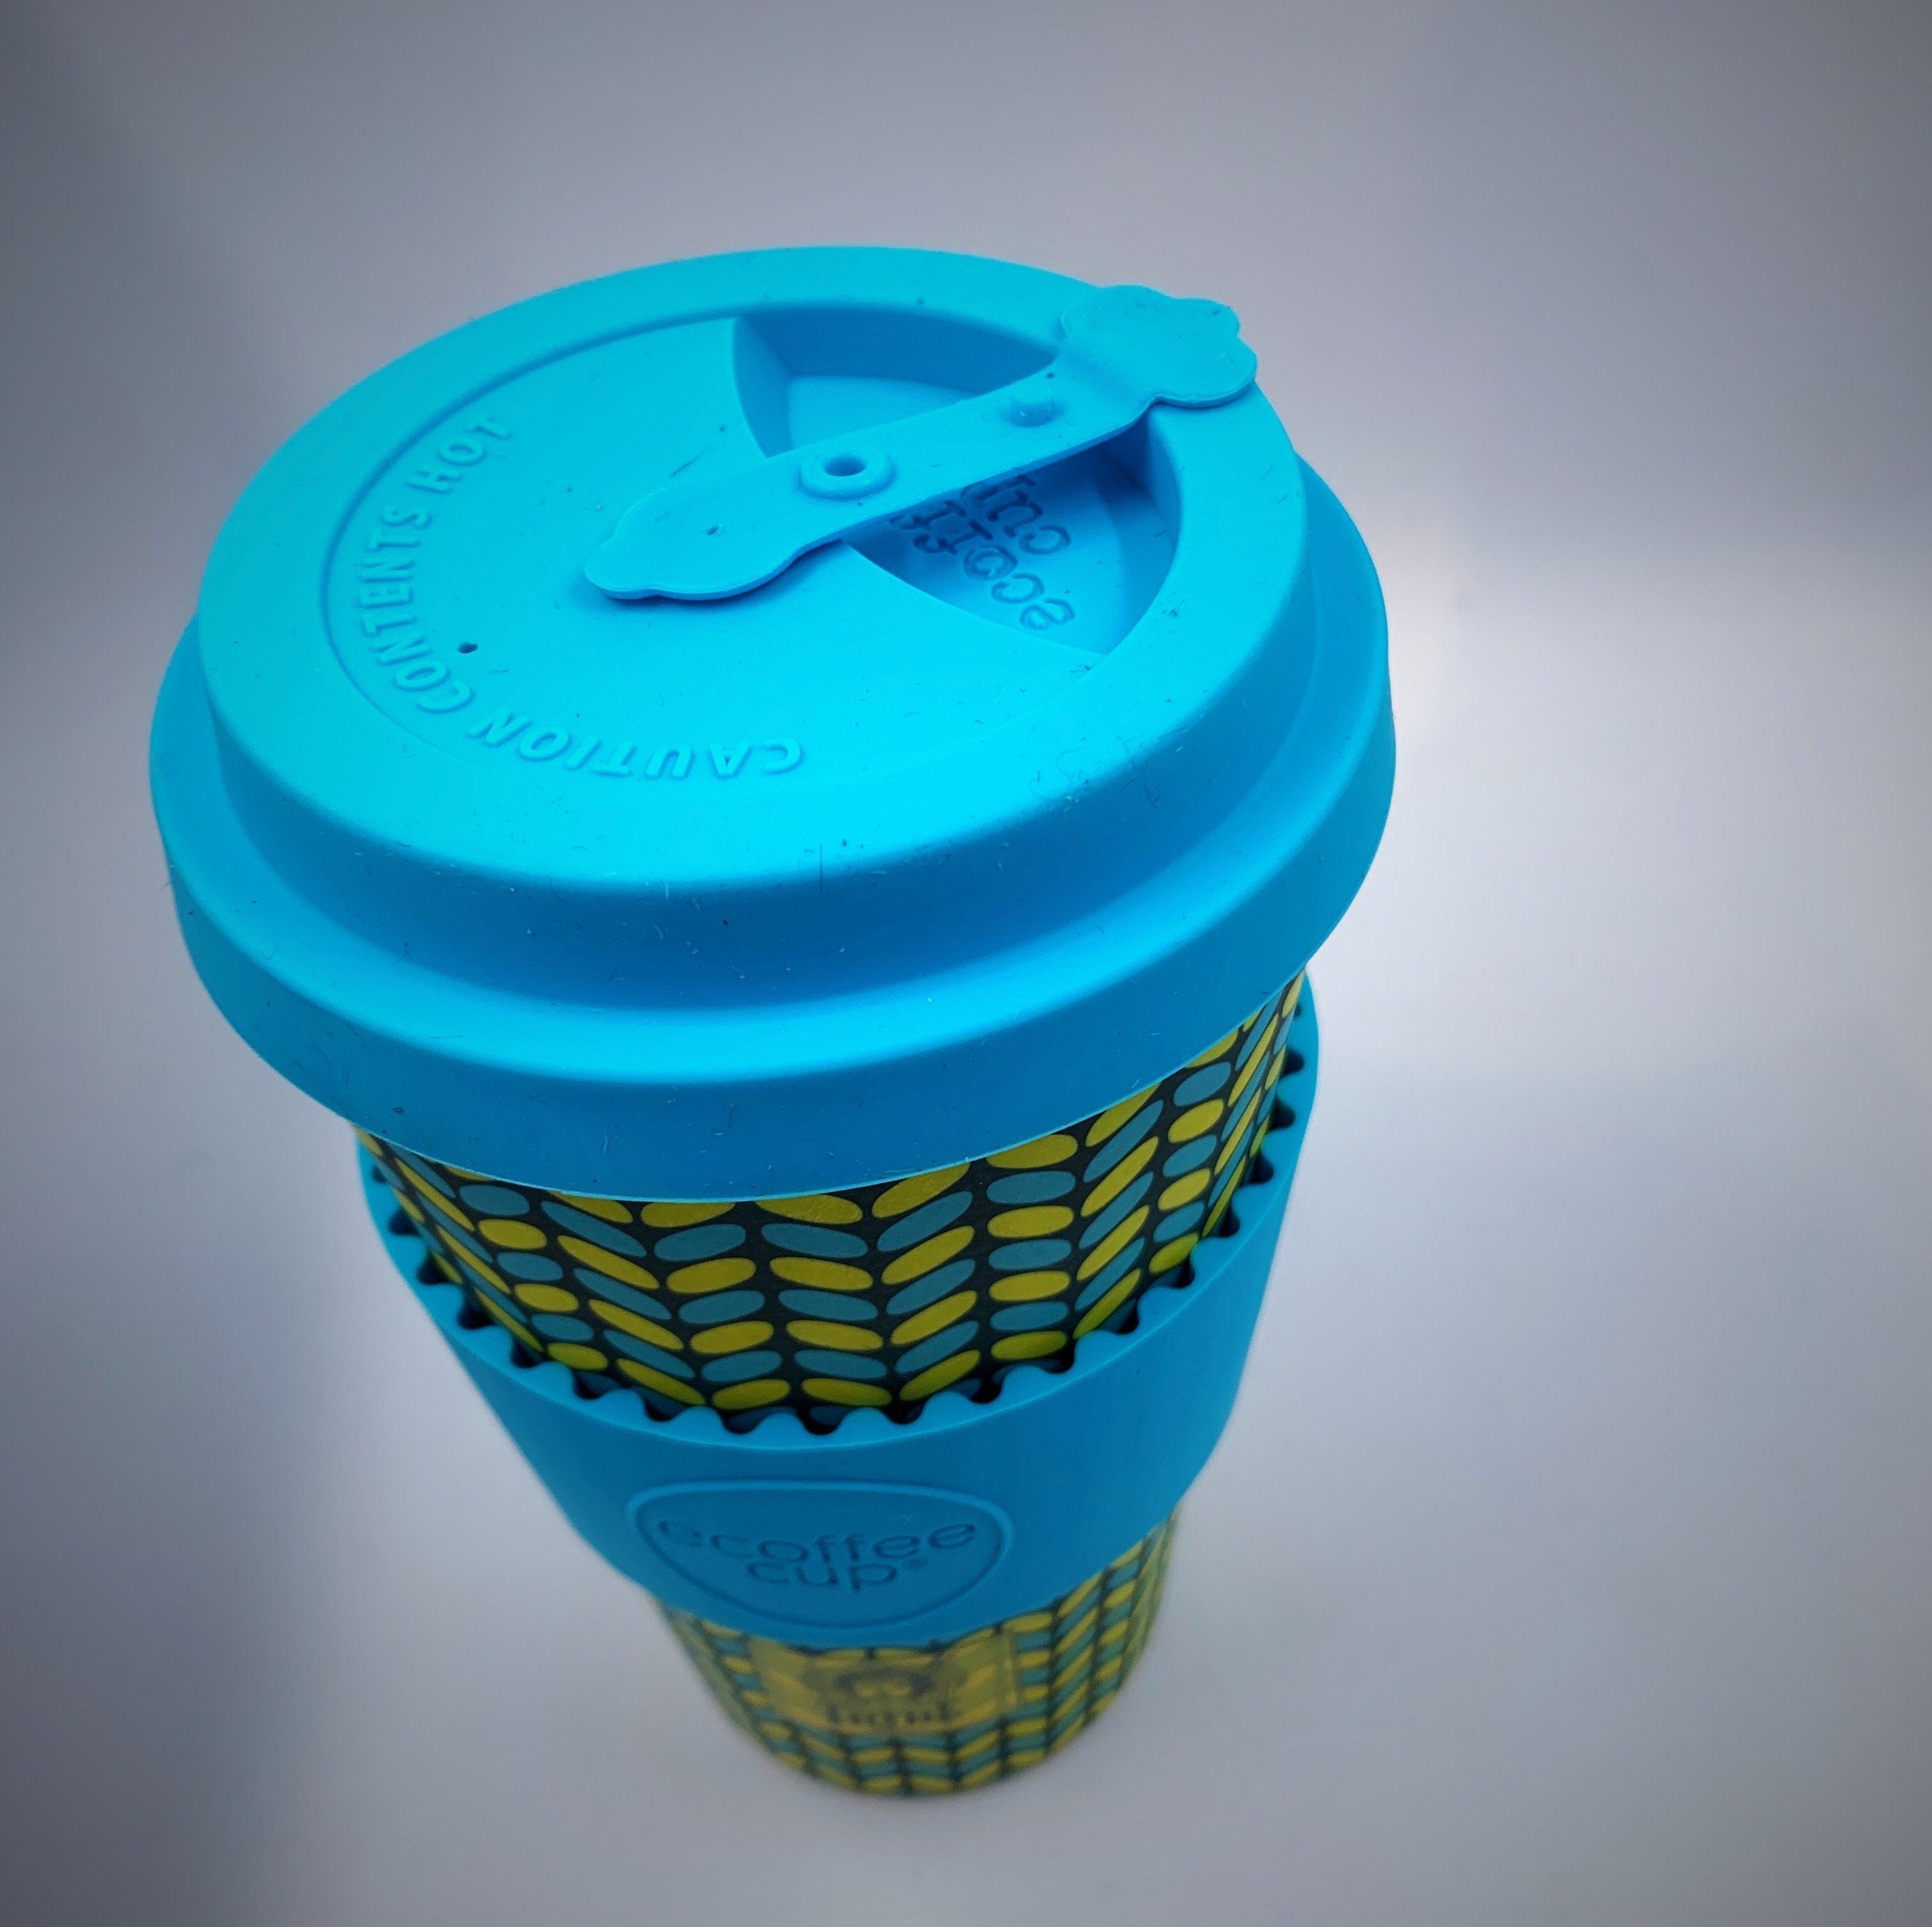  Ecoffee Cup Reusable Sustainable To-Go Travel Coffee